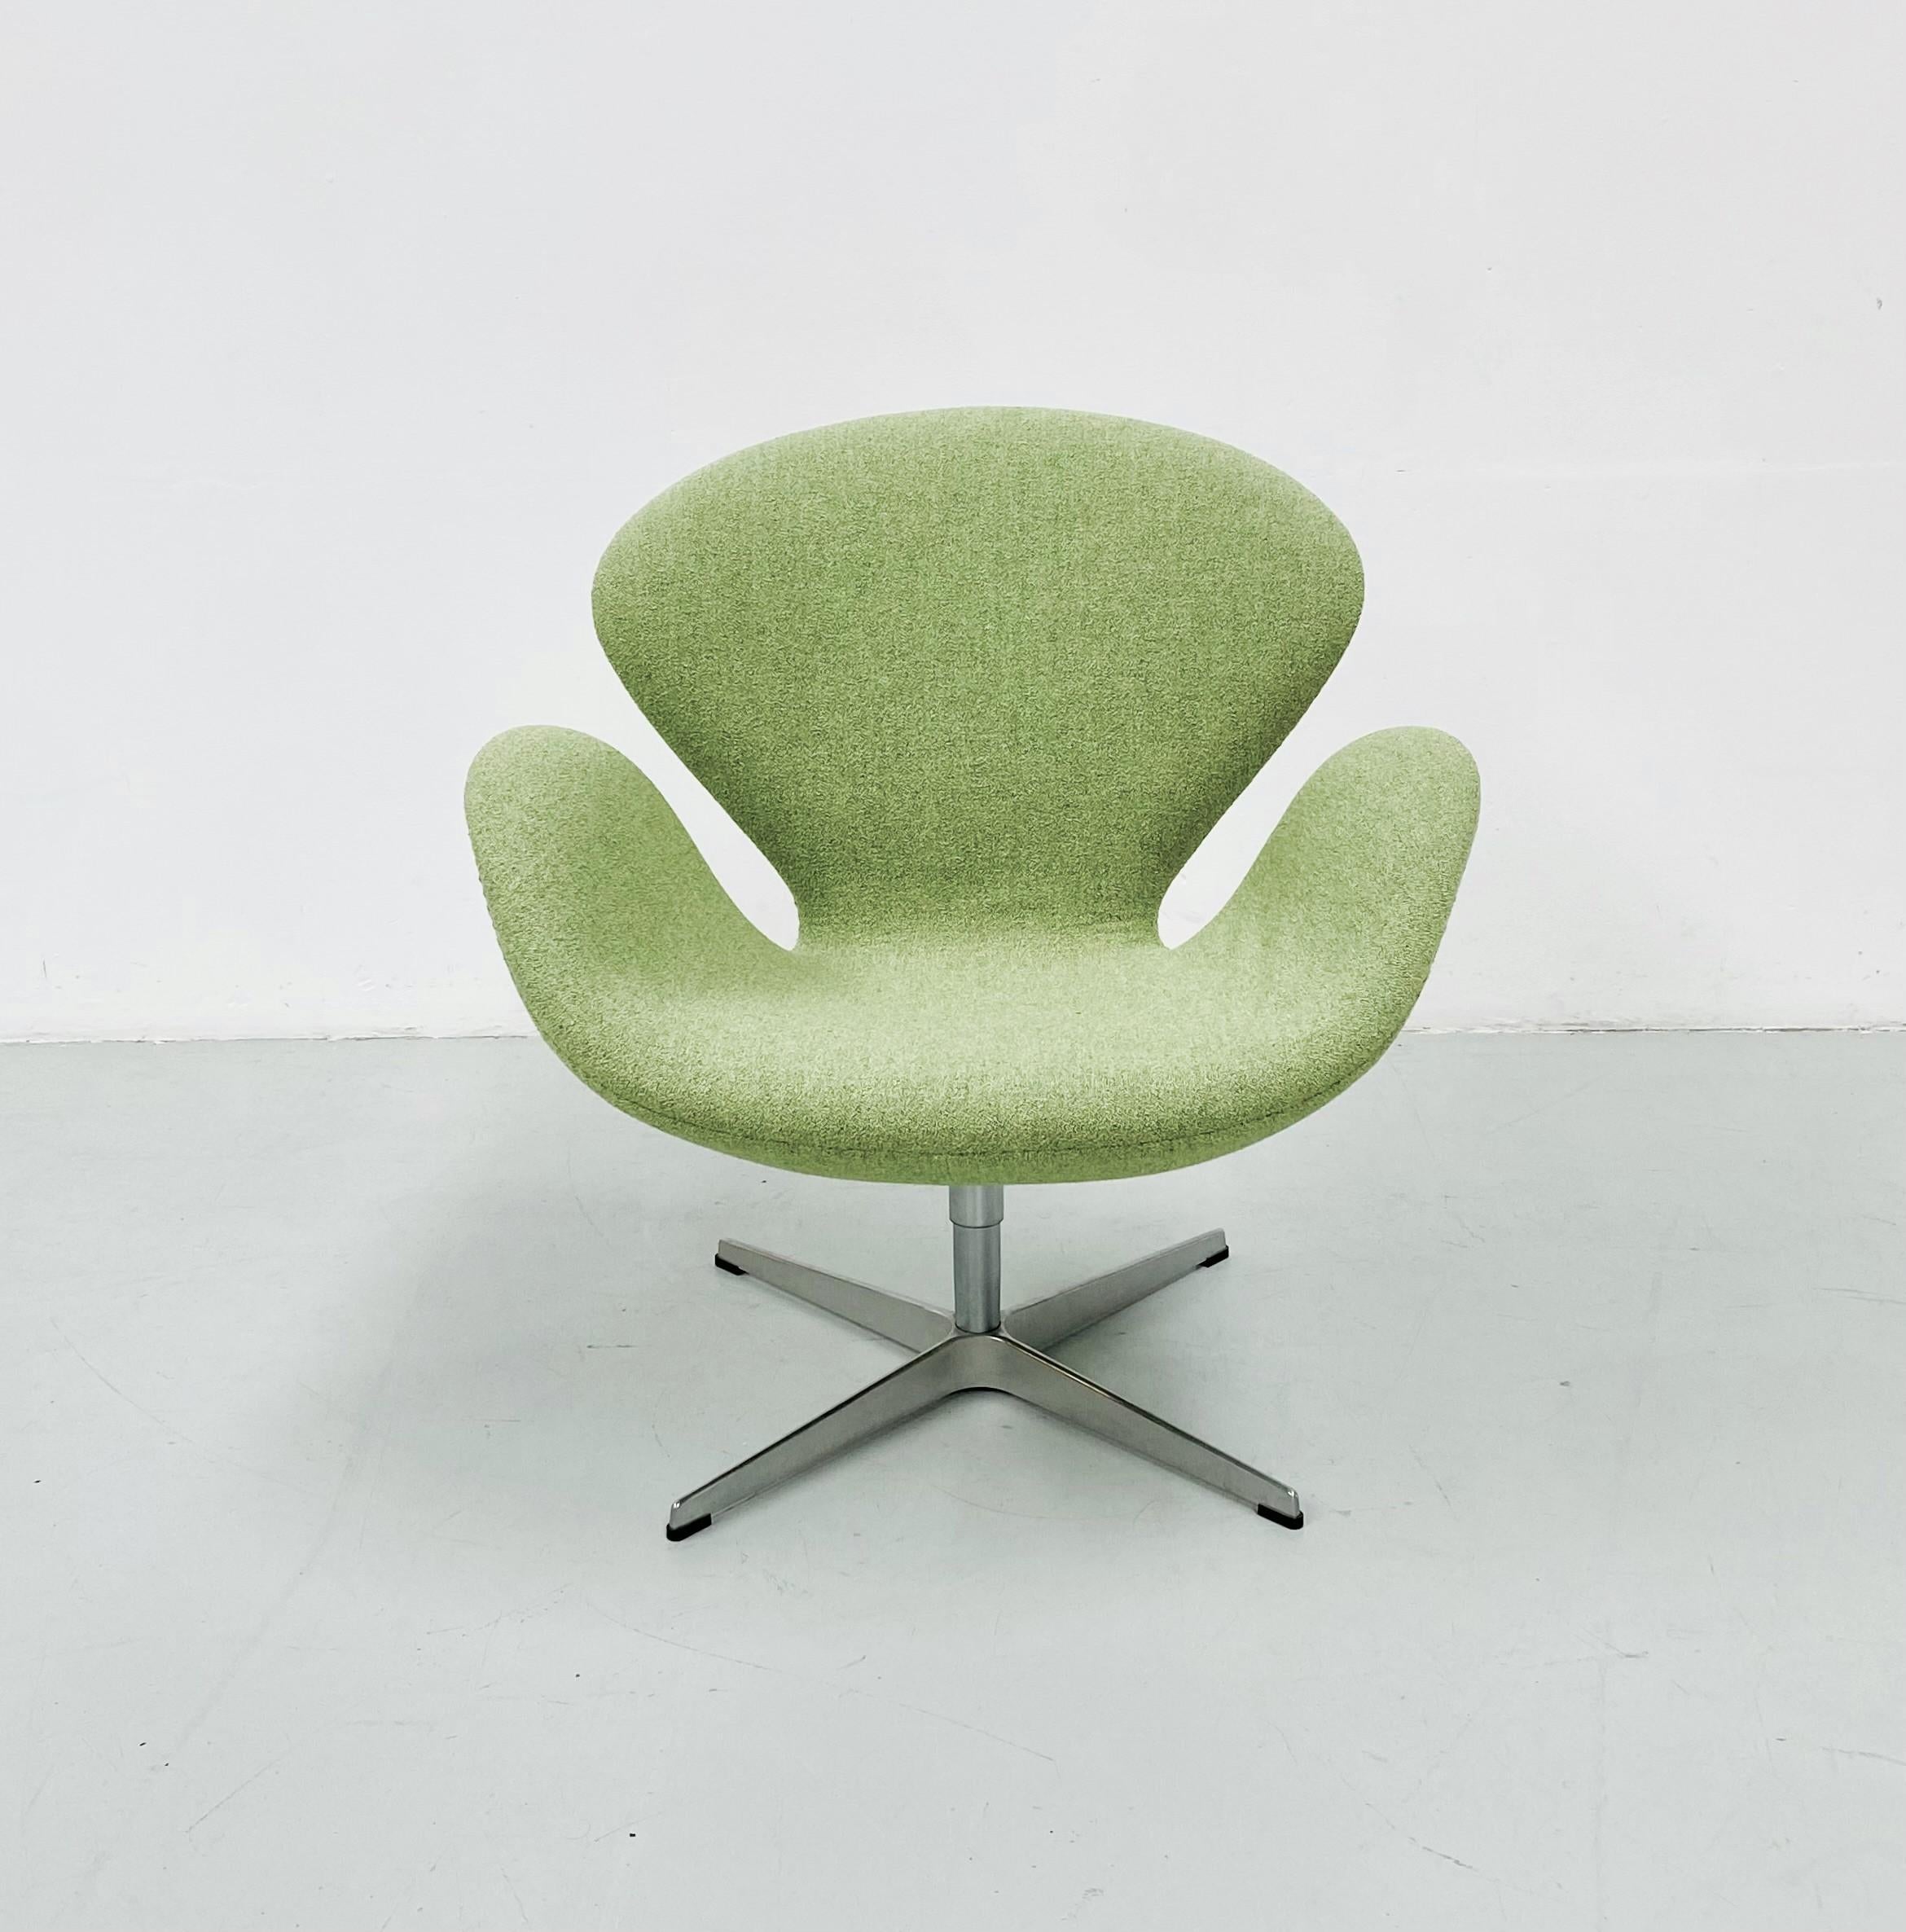 This Swan chair was designed by Arne Jacobsen in 1958 for the lobby and lounge areas of the SAS Royal Hotel in Copenhagen. The design contains no straight lines, making it look organic and soft despite its simplicity and strong architectural